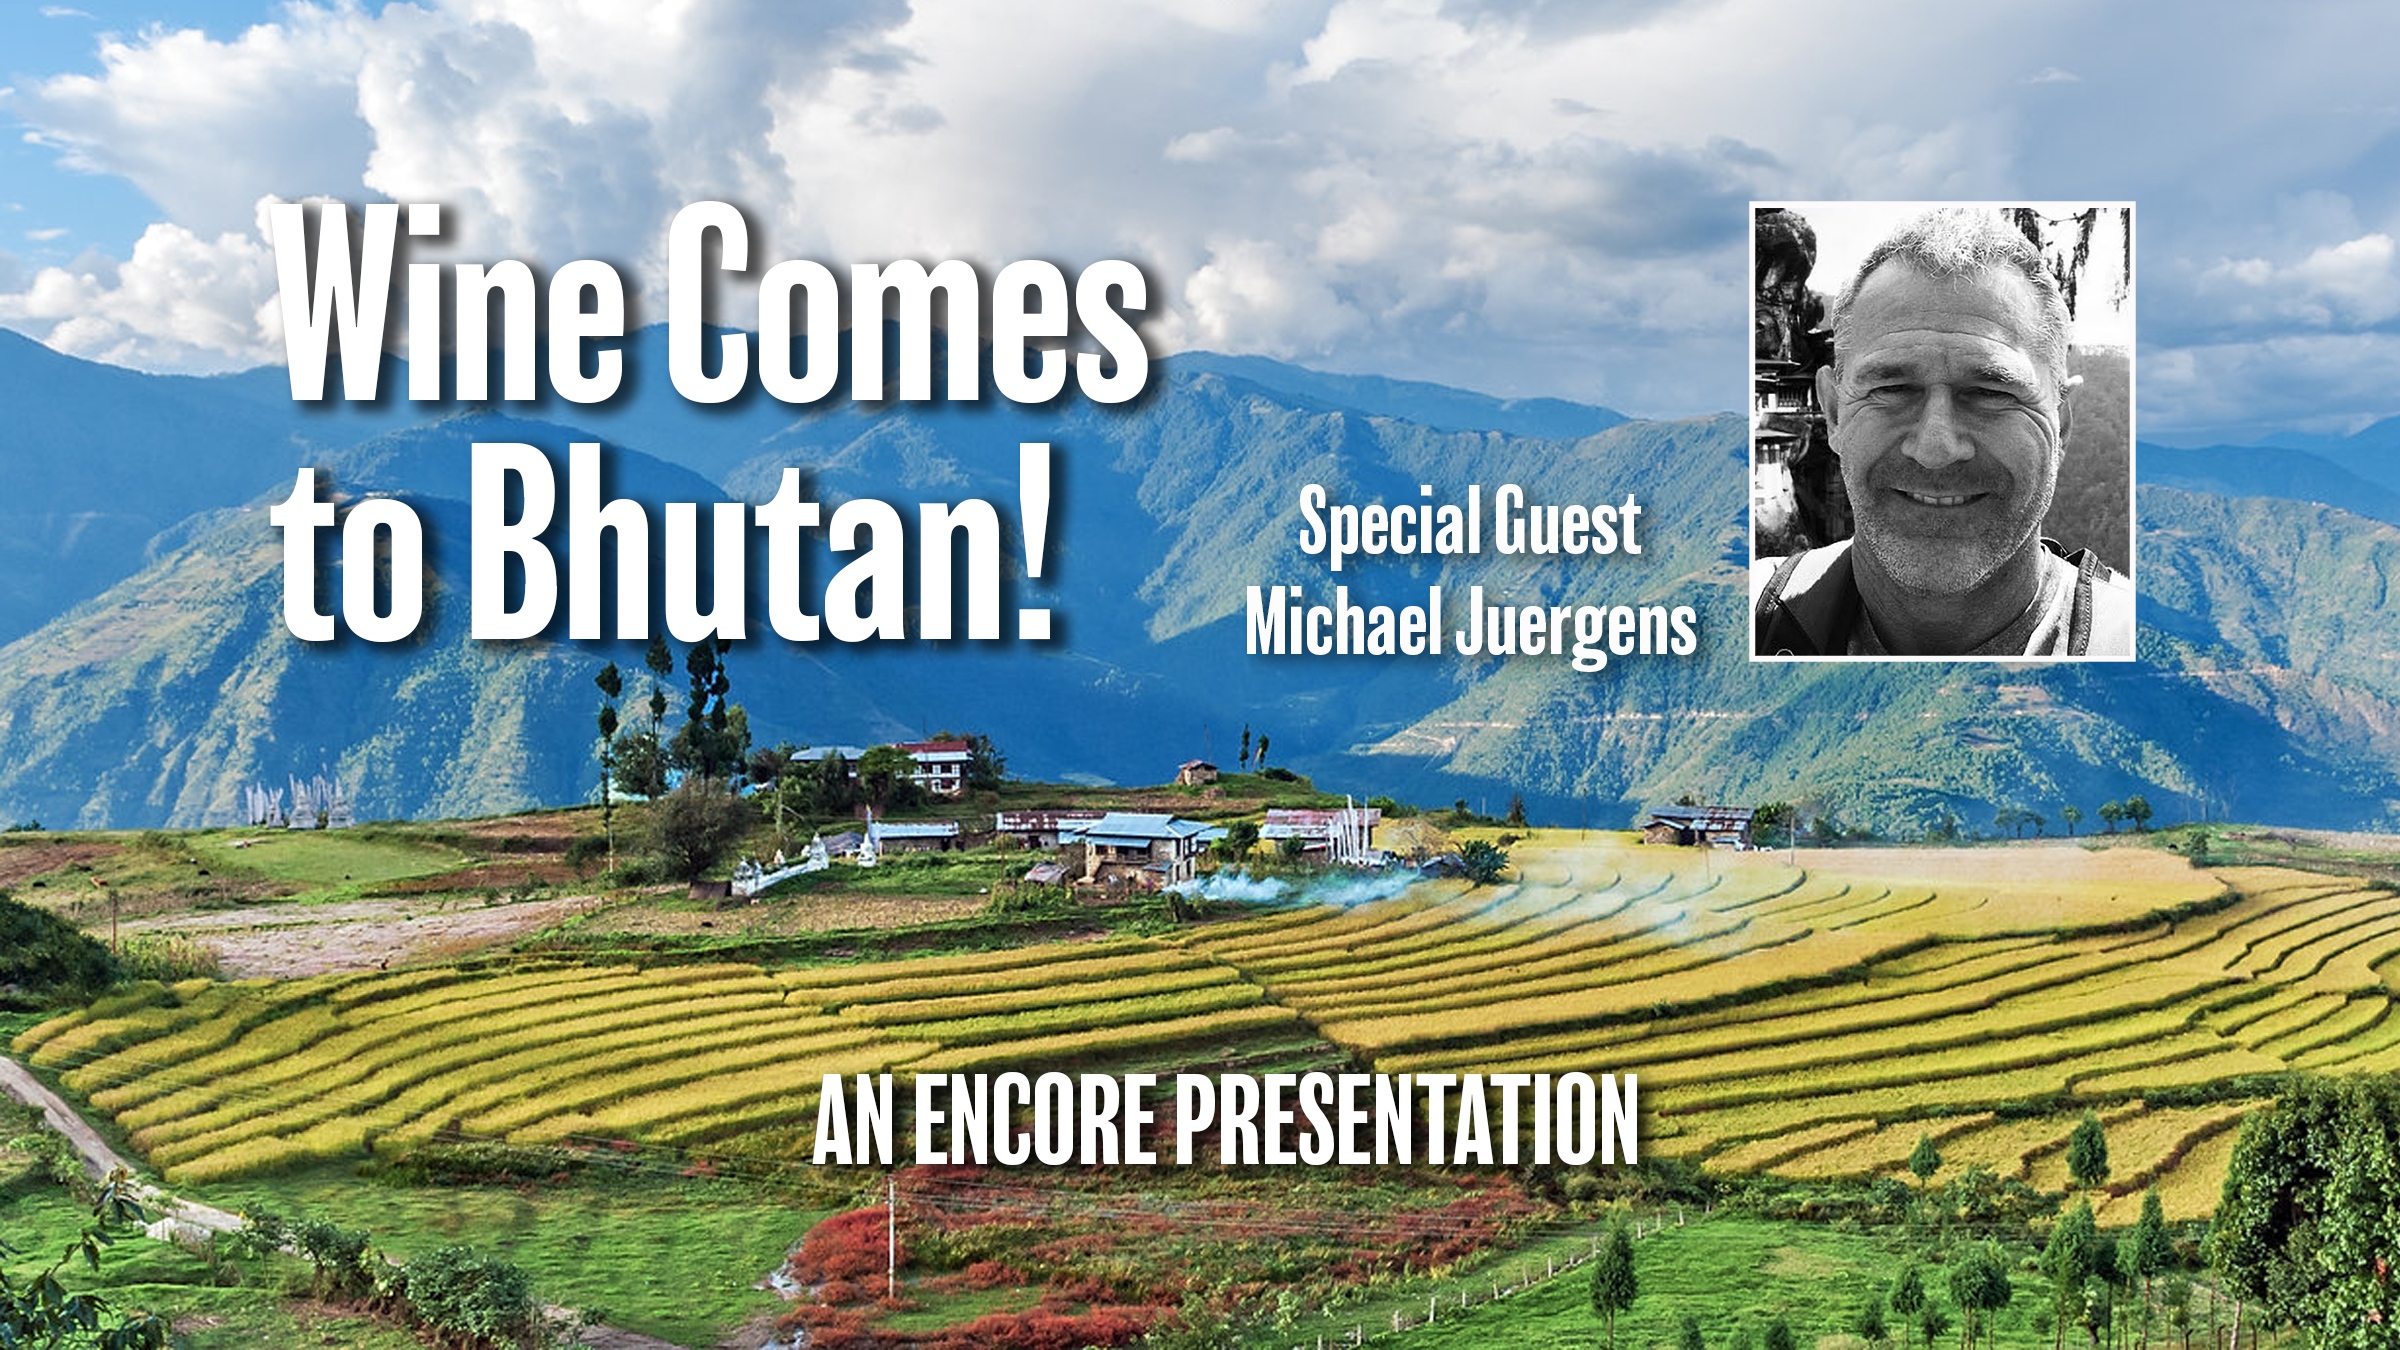 Episode #643 - The Foot Race That Brought Winemaking to the Himalayas!